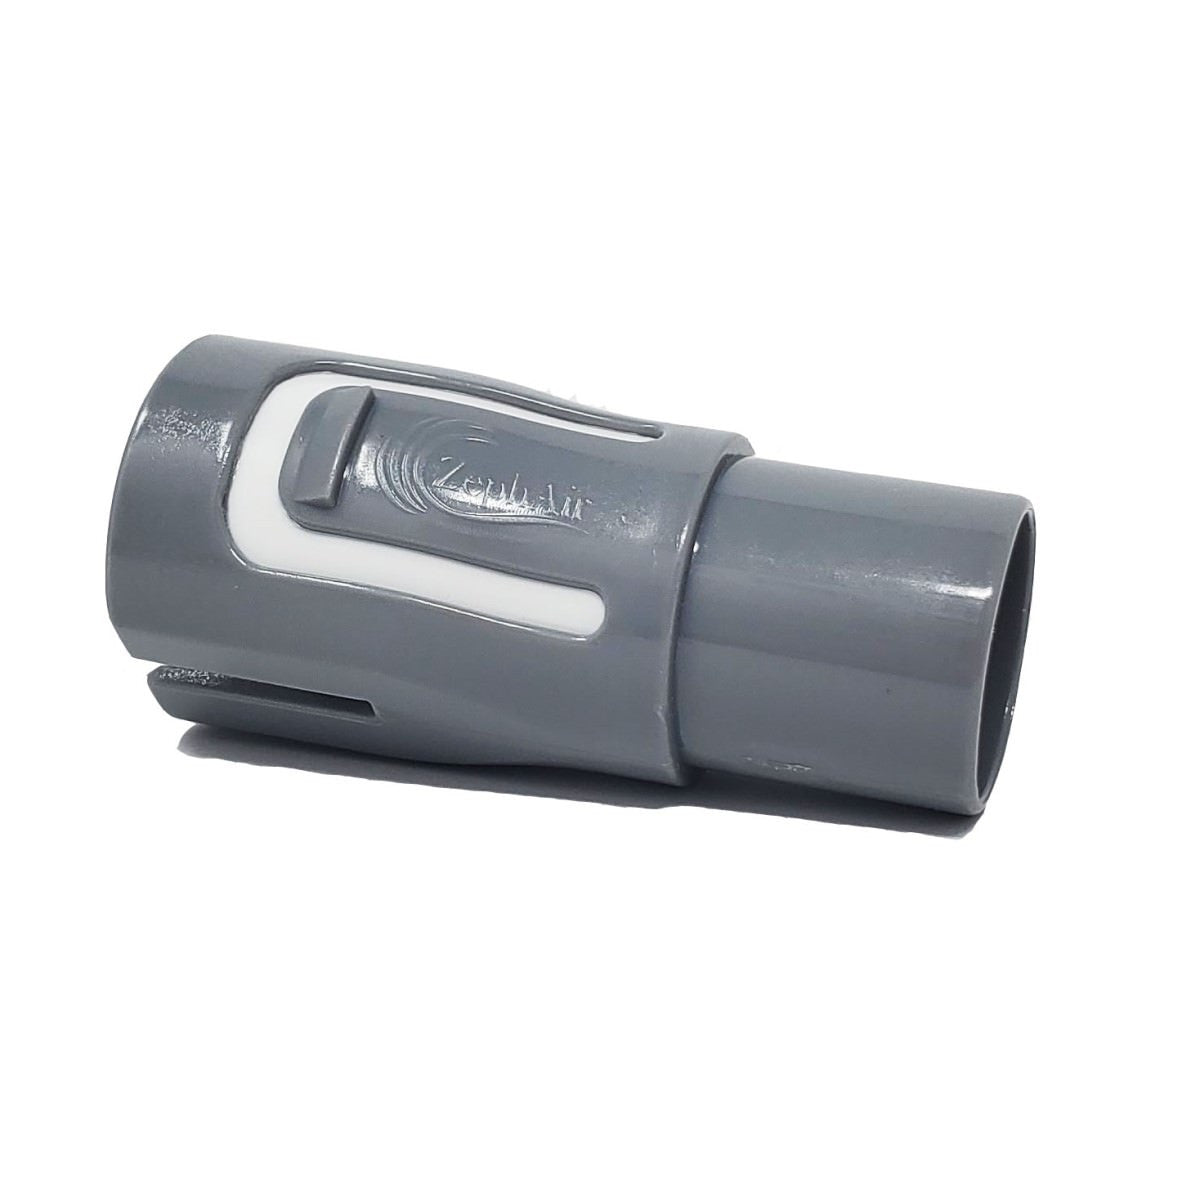 The Zephair AirMini Universal CPAP Mask Adapter that helps you connect any CPAP tube to the ResMed AirMIni. 